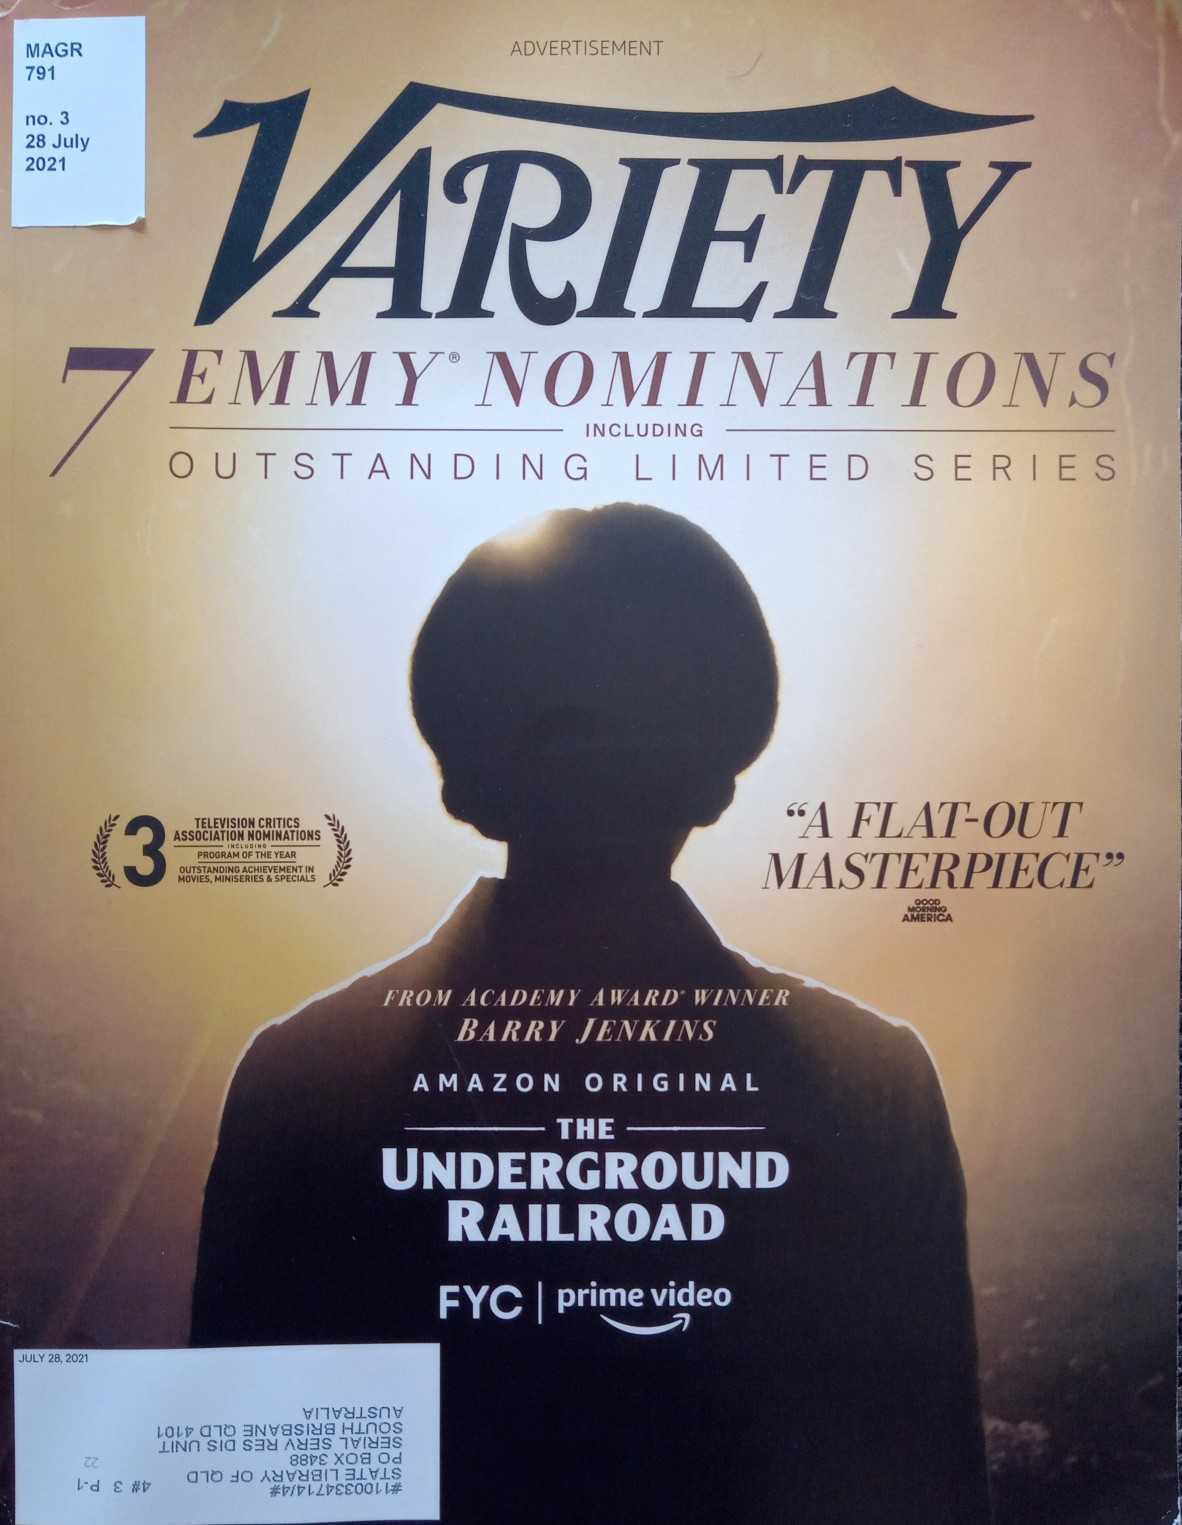 Front cover of Variety magazine with silhouette of person July 2021